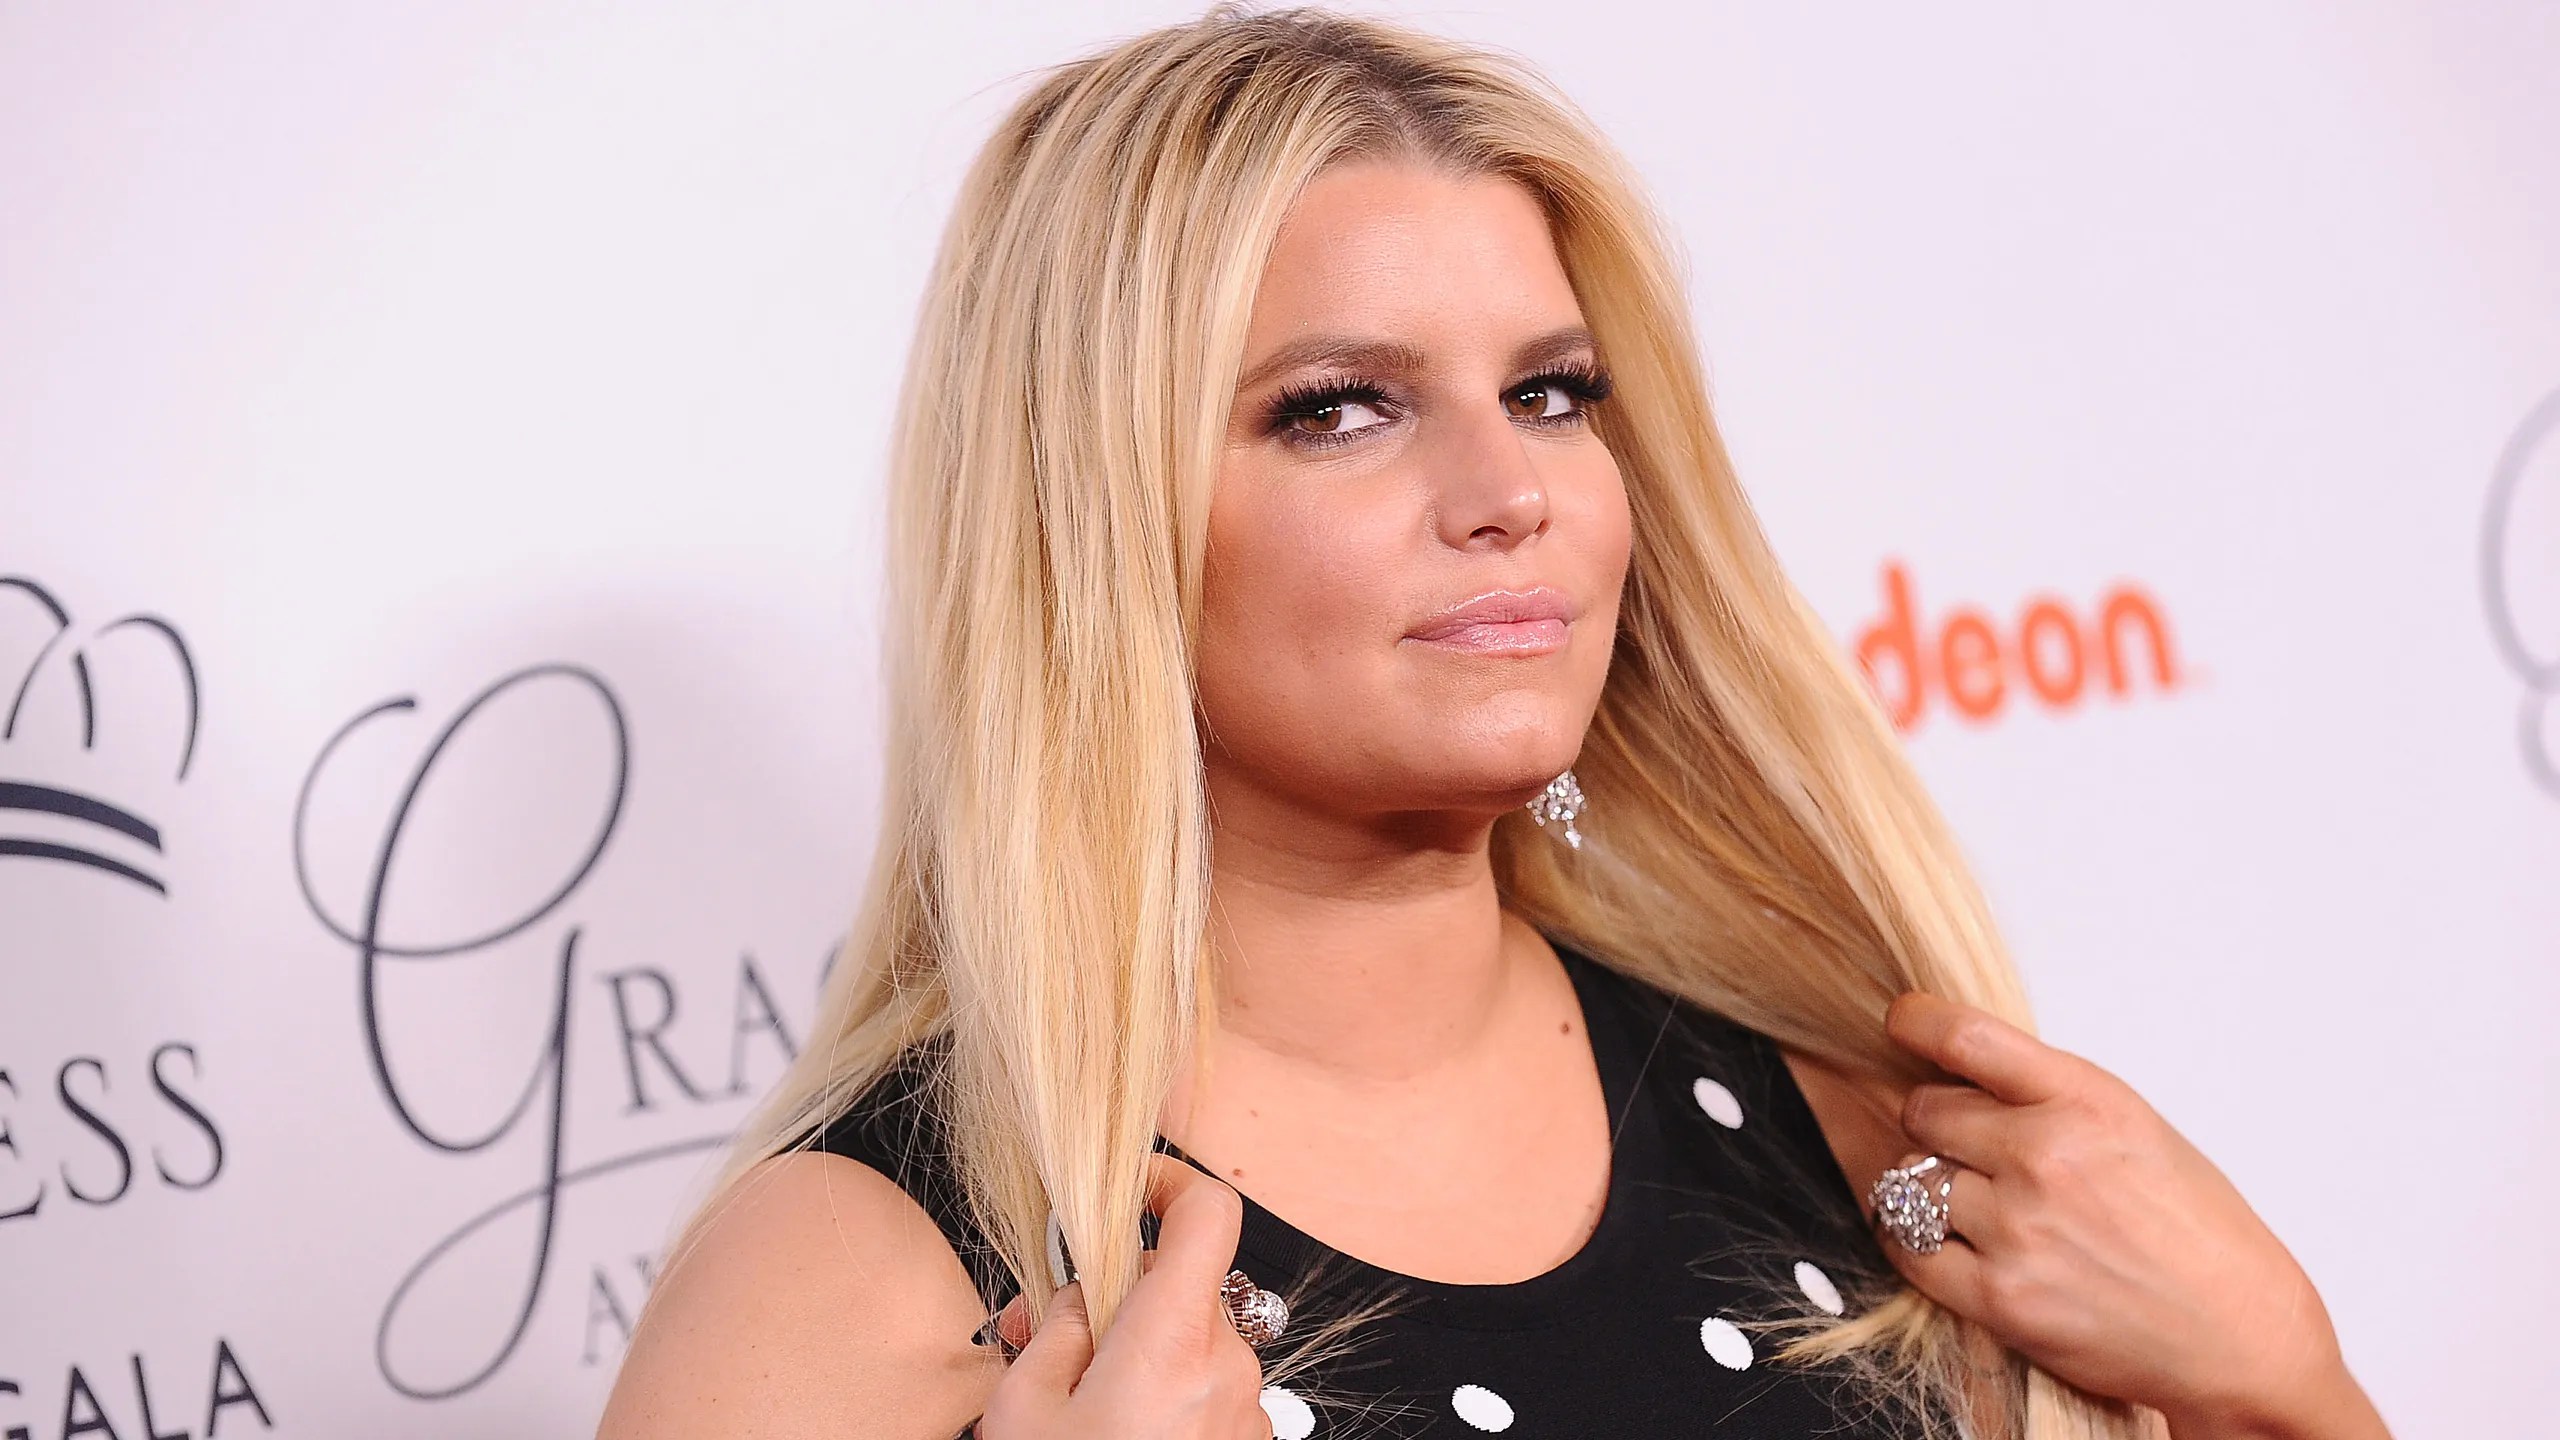 Jessica Simpson's Lips Spark Rude Comments on New Selfie Allure